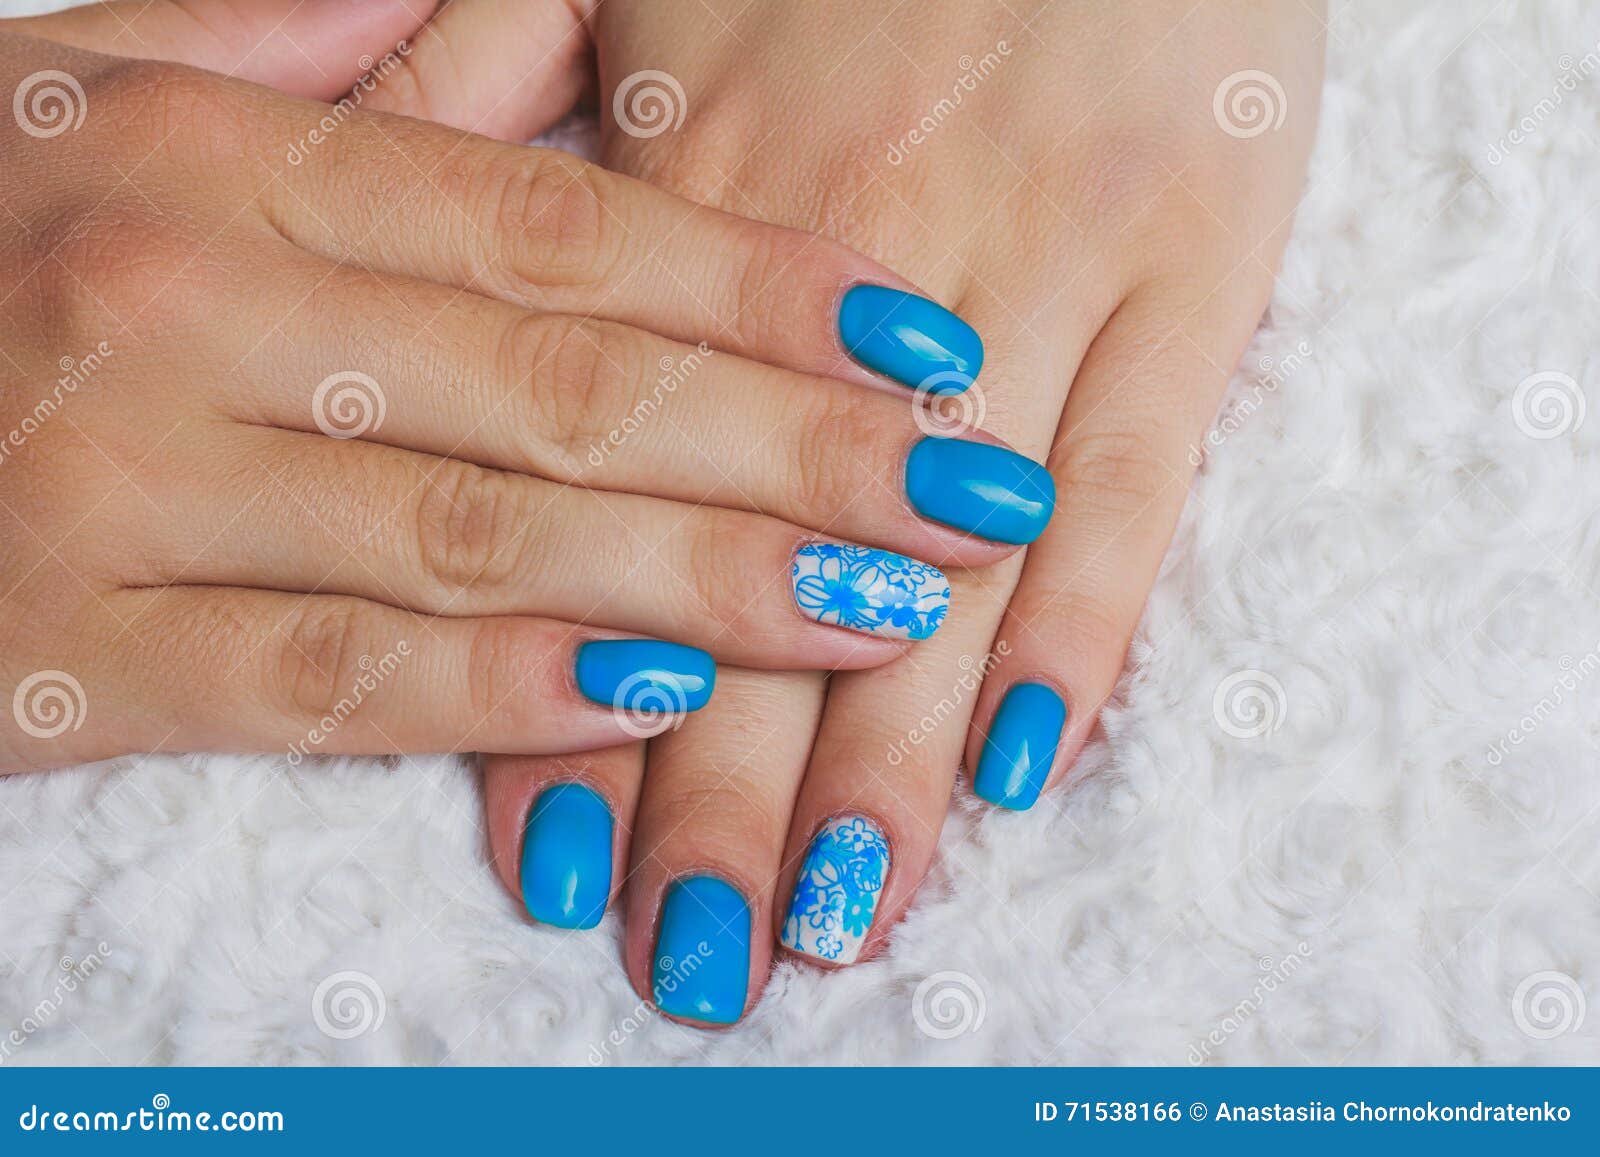 Best Summer Nails 2021 To Rock Your Look : Almost transparent base & Baby  Blue